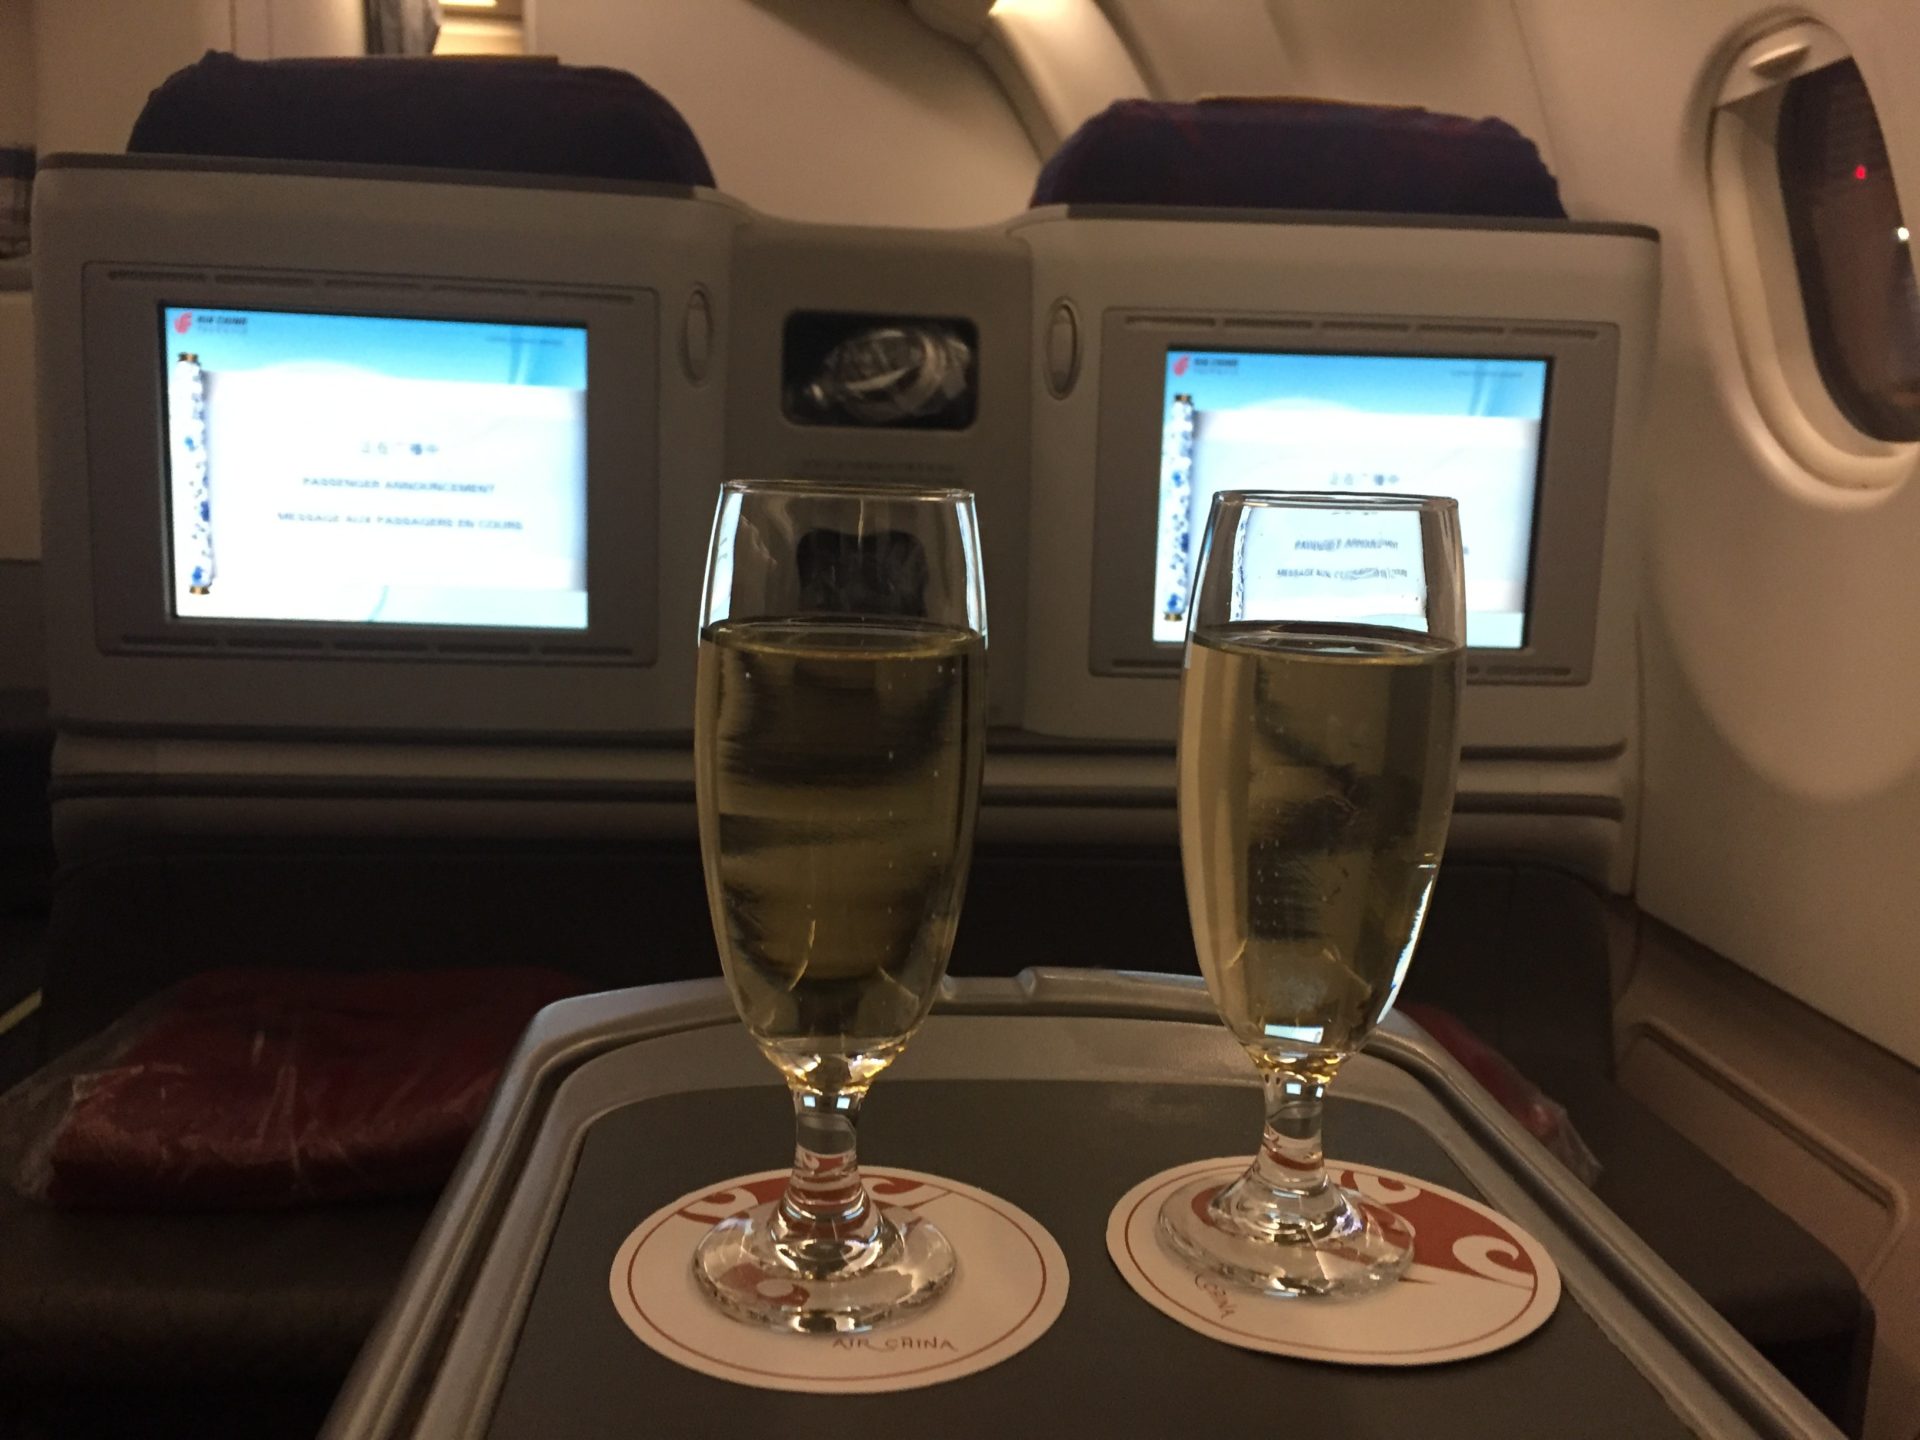 two glasses of champagne on a tray in front of a television